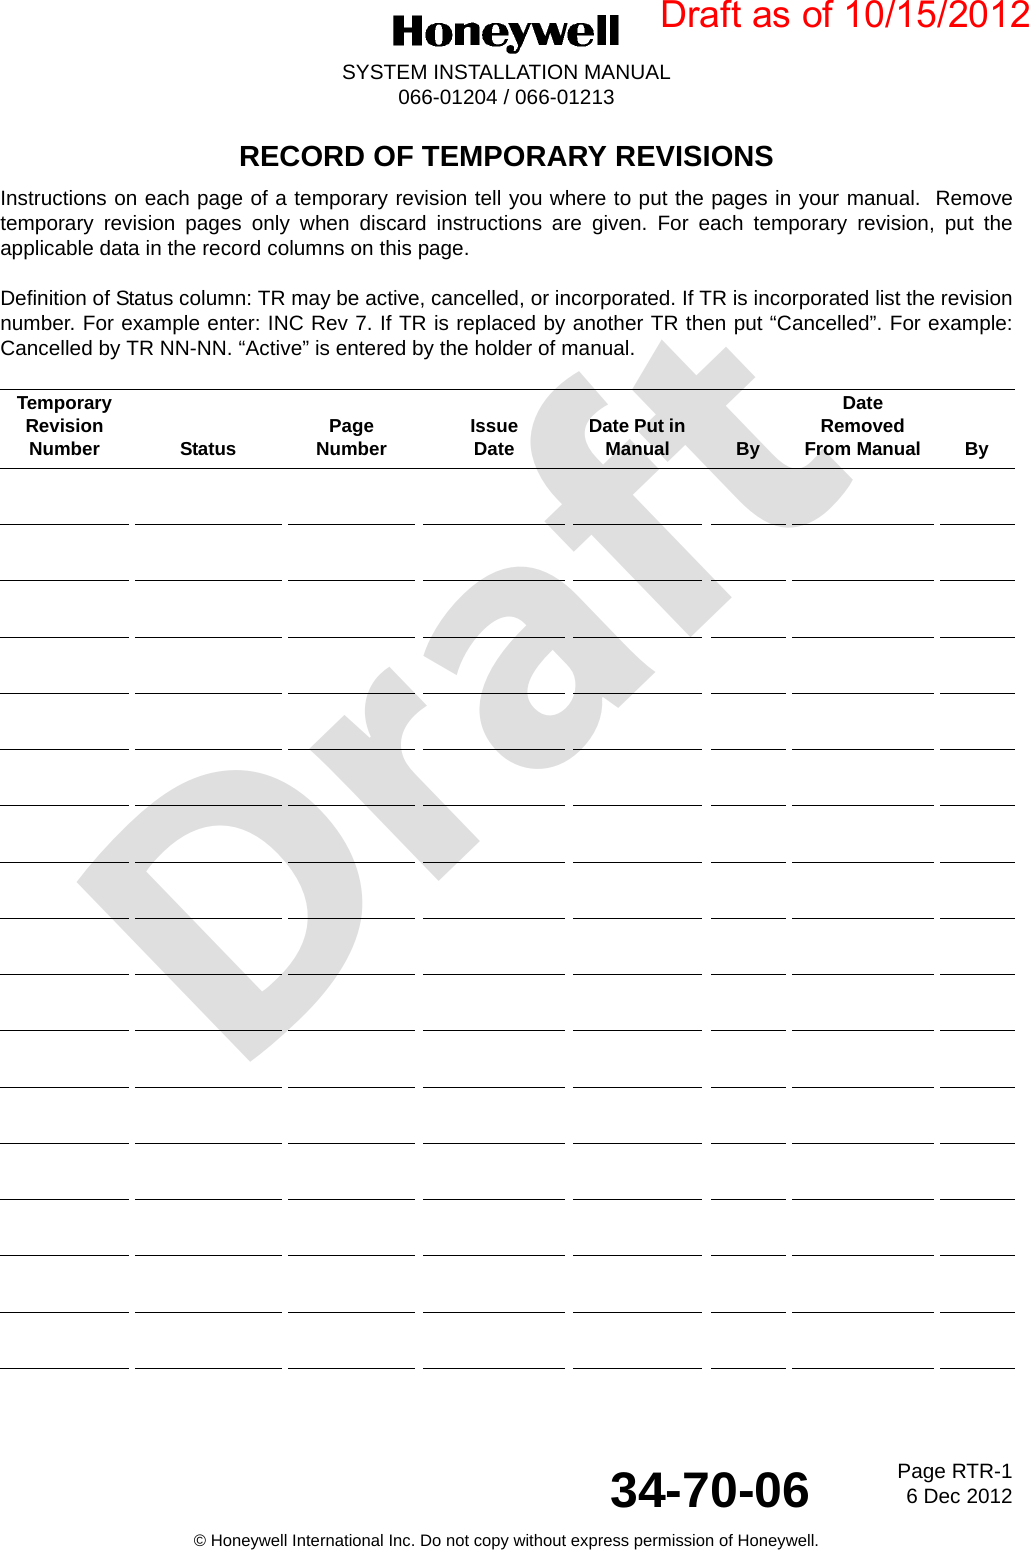 DraftPage RTR-16 Dec 201234-70-06SYSTEM INSTALLATION MANUAL066-01204 / 066-01213© Honeywell International Inc. Do not copy without express permission of Honeywell.RECORD OF TEMPORARY REVISIONSInstructions on each page of a temporary revision tell you where to put the pages in your manual.  Removetemporary revision pages only when discard instructions are given. For each temporary revision, put theapplicable data in the record columns on this page.Definition of Status column: TR may be active, cancelled, or incorporated. If TR is incorporated list the revisionnumber. For example enter: INC Rev 7. If TR is replaced by another TR then put “Cancelled”. For example:Cancelled by TR NN-NN. “Active” is entered by the holder of manual.TemporaryRevision Number Status PageNumber IssueDate Date Put in Manual ByDateRemovedFrom Manual ByDraft as of 10/15/2012